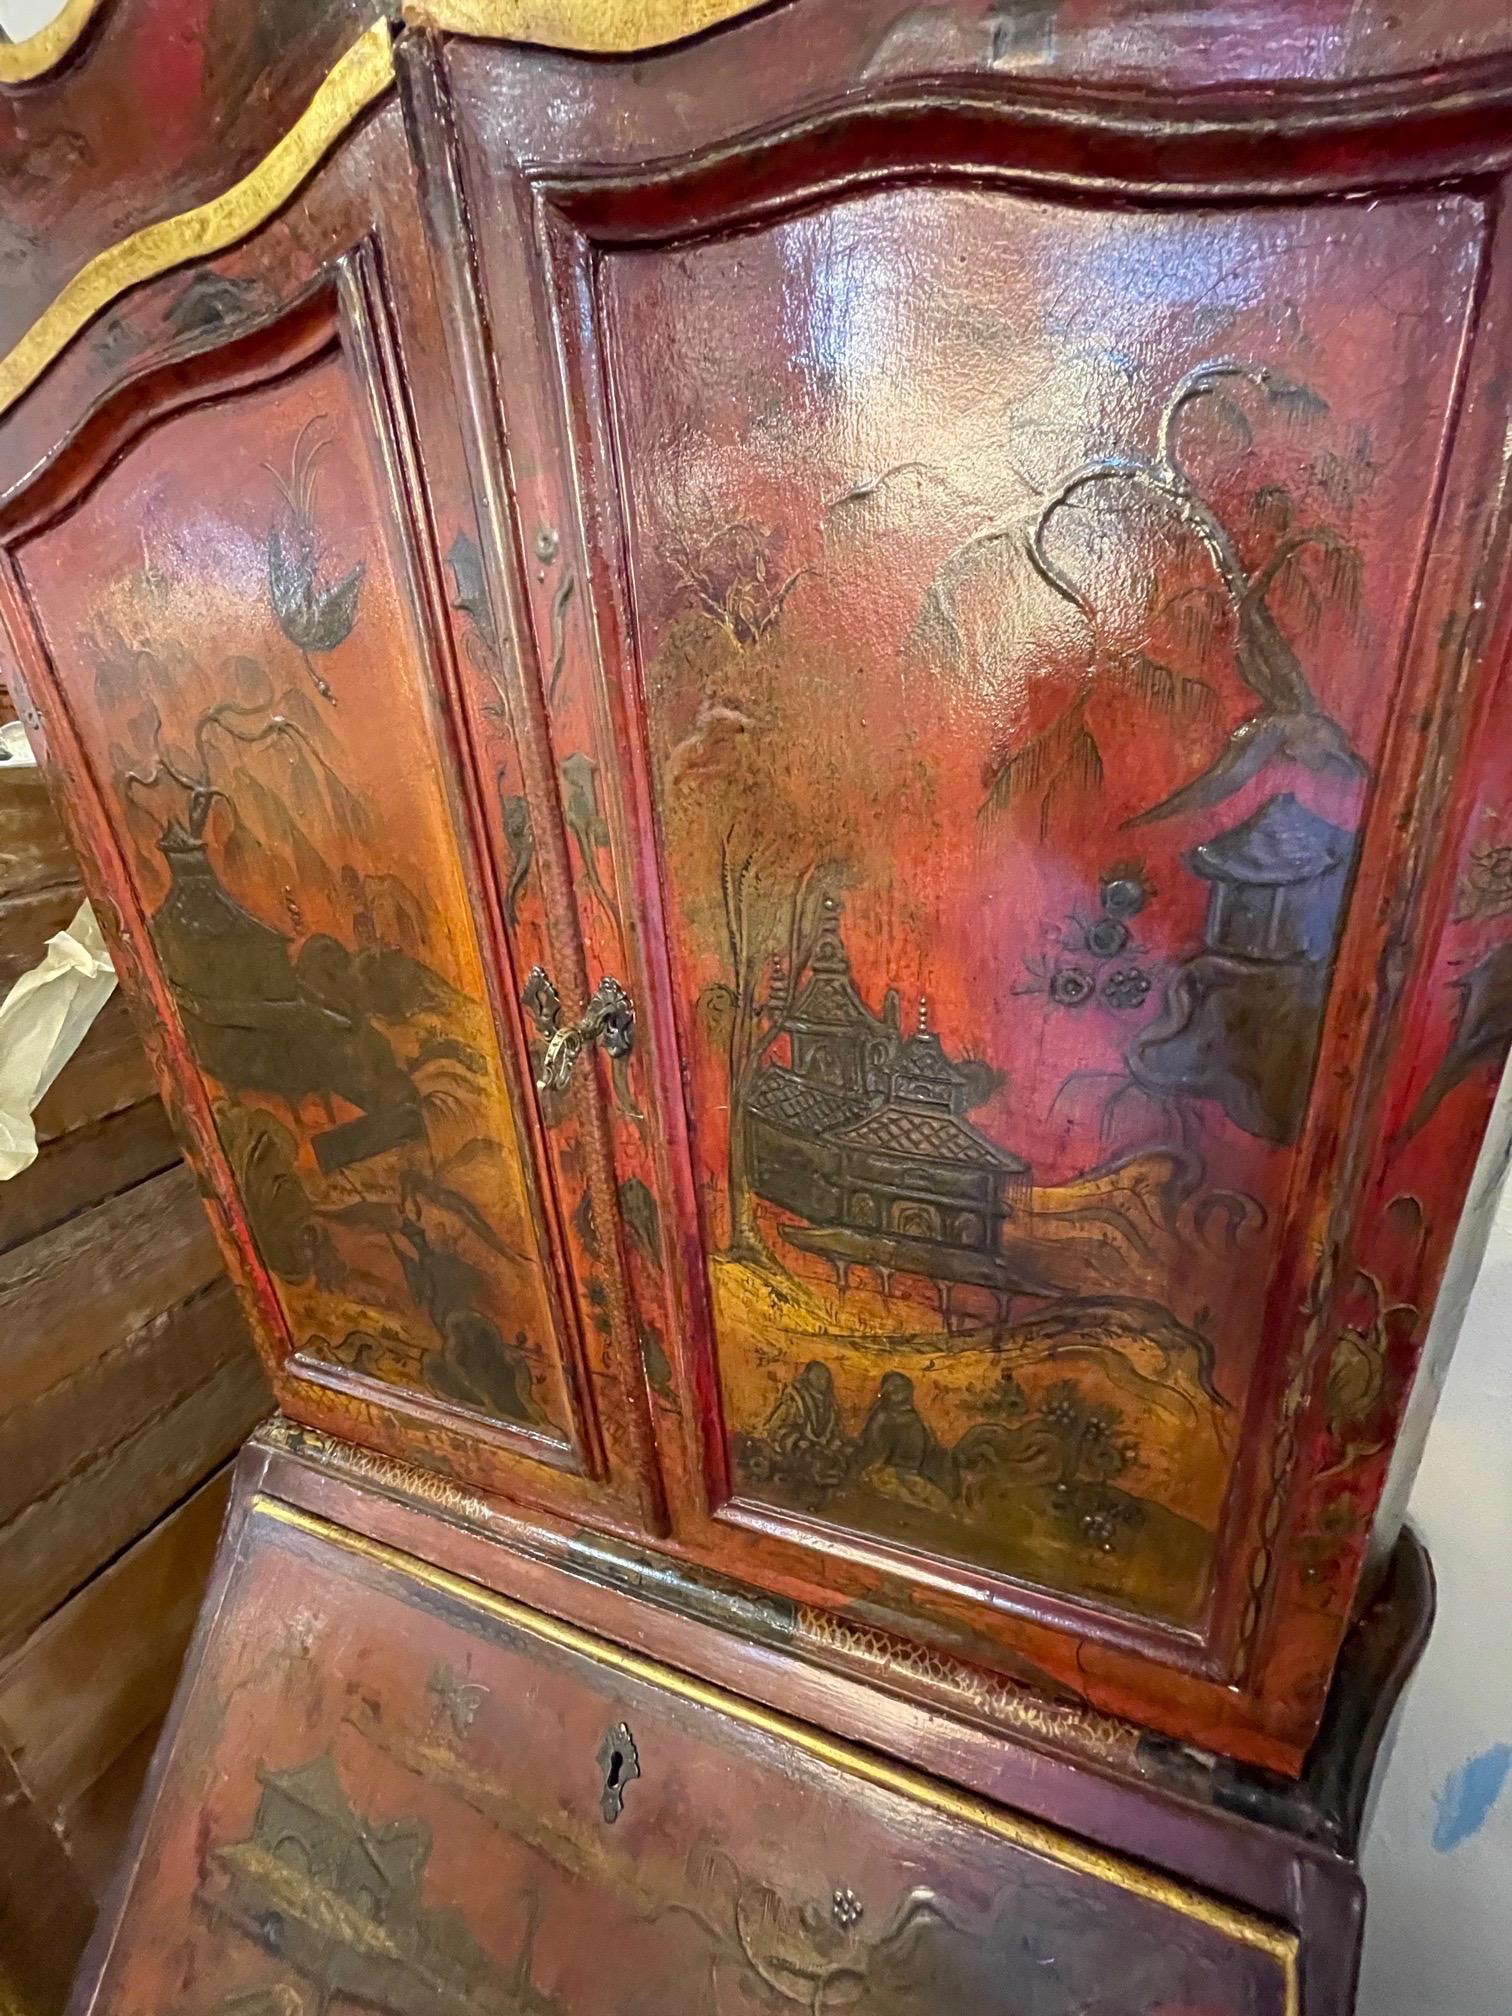 Extraordinary rare 19th century Italian lacquered red secretary with raised chinoiserie design. Beautiful Asian images on the outside of the cabinet and also on the inside. Opens to reveal storage compartments and a desk surface. Three drawers for